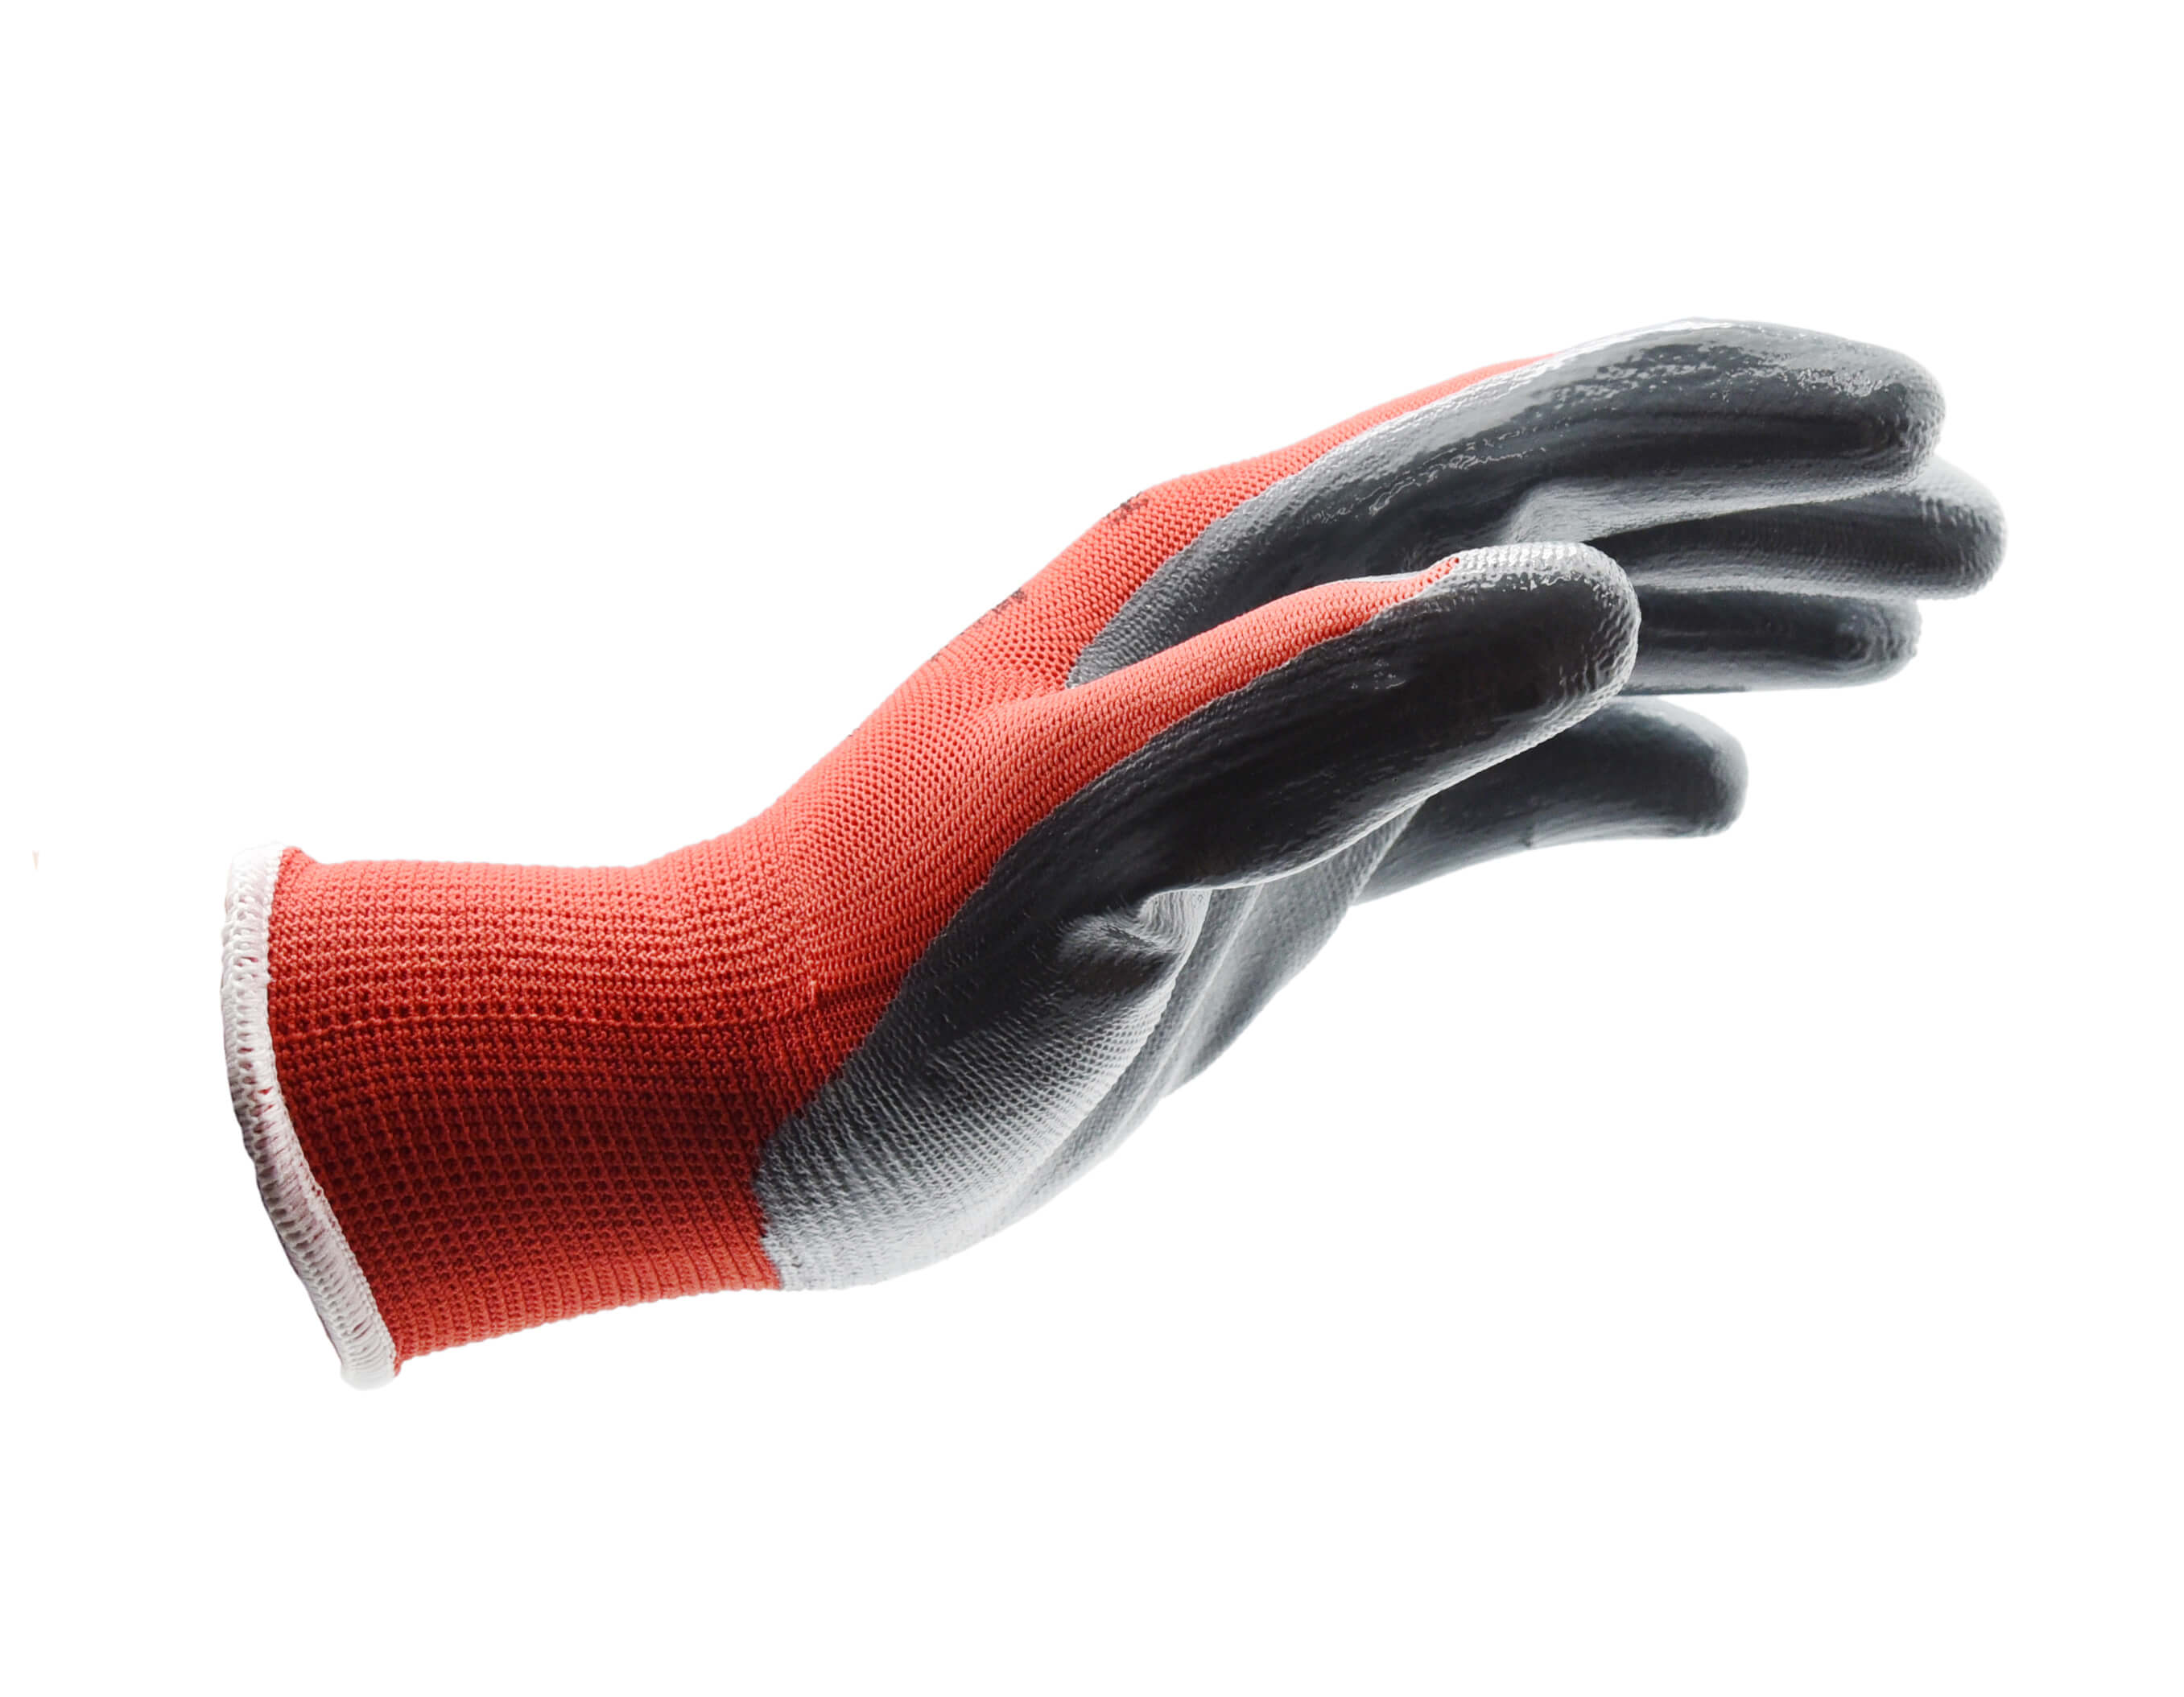 GREY SMOOTH NITRILE PALM RED POLYESTER GLOVE SZ 9